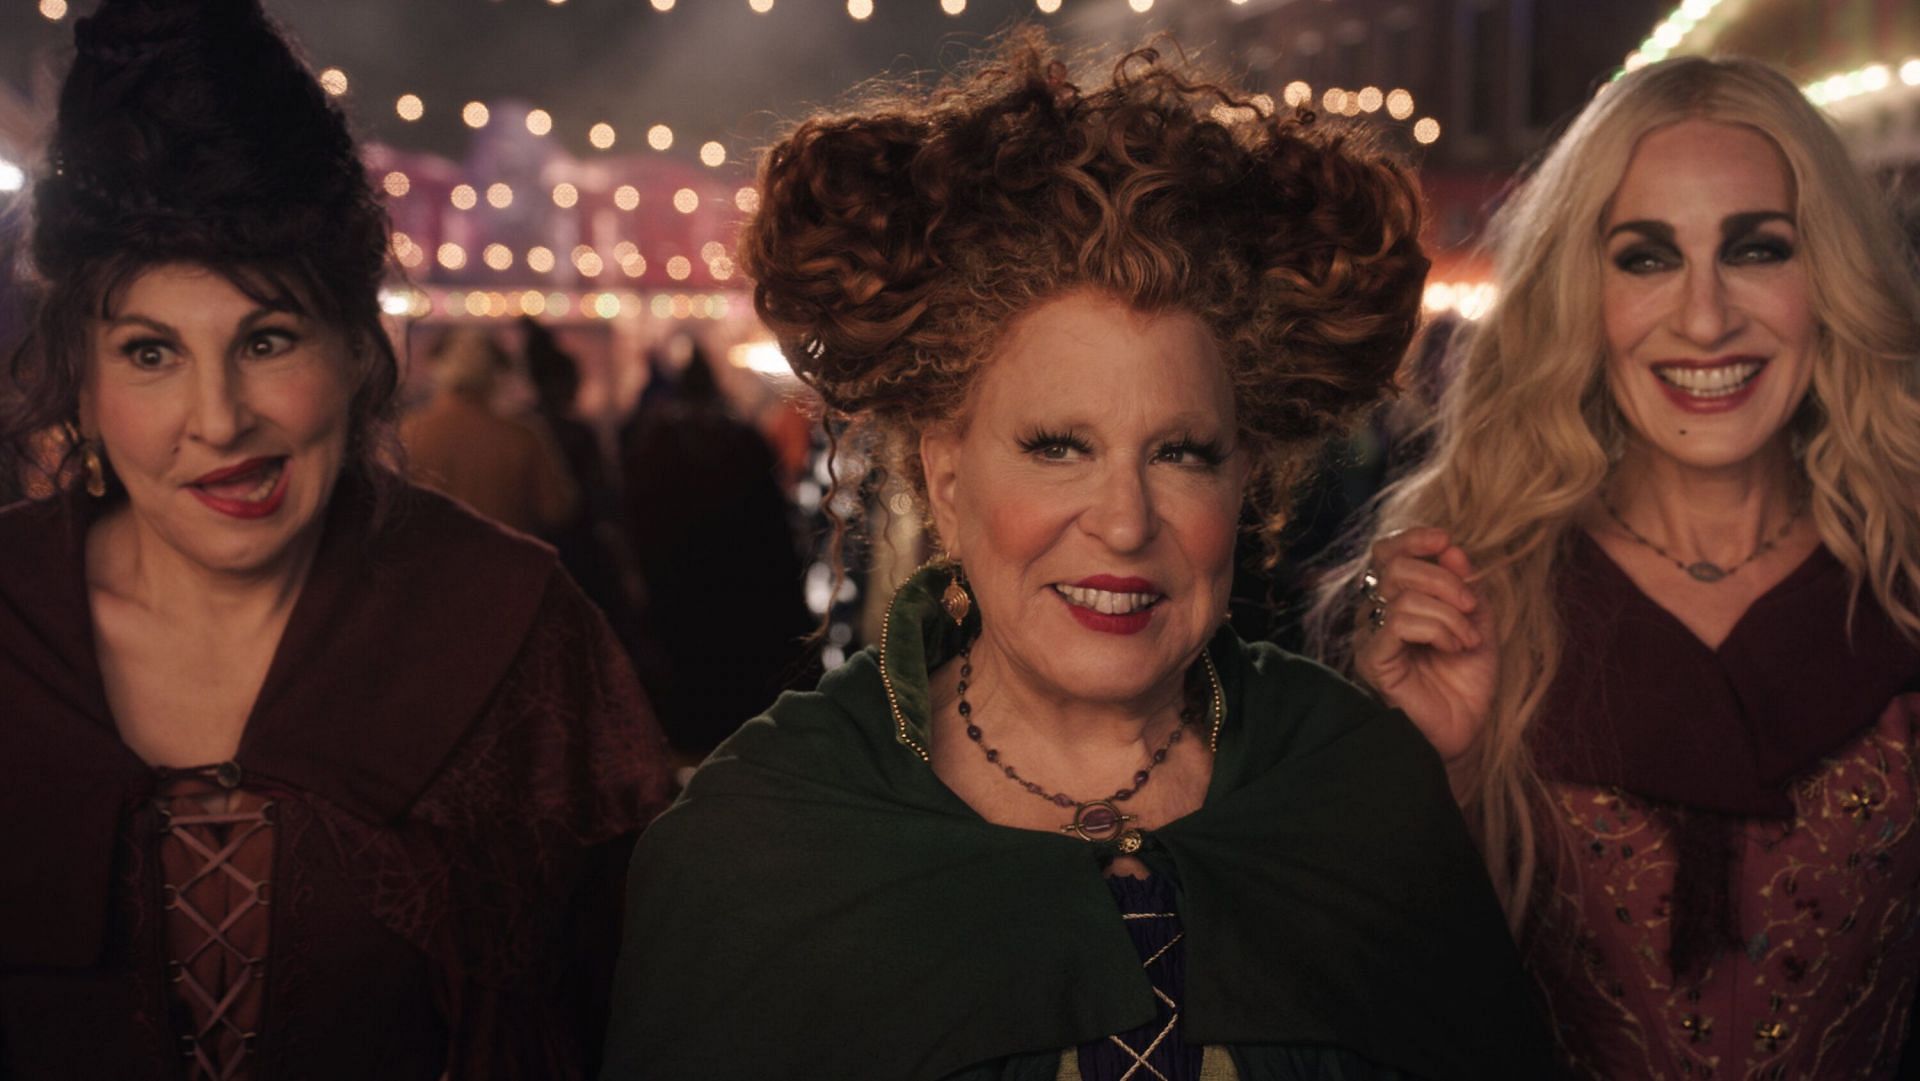 Hocus Pocus 3 update comes 10 months after second part was released. (Photo via Disney)